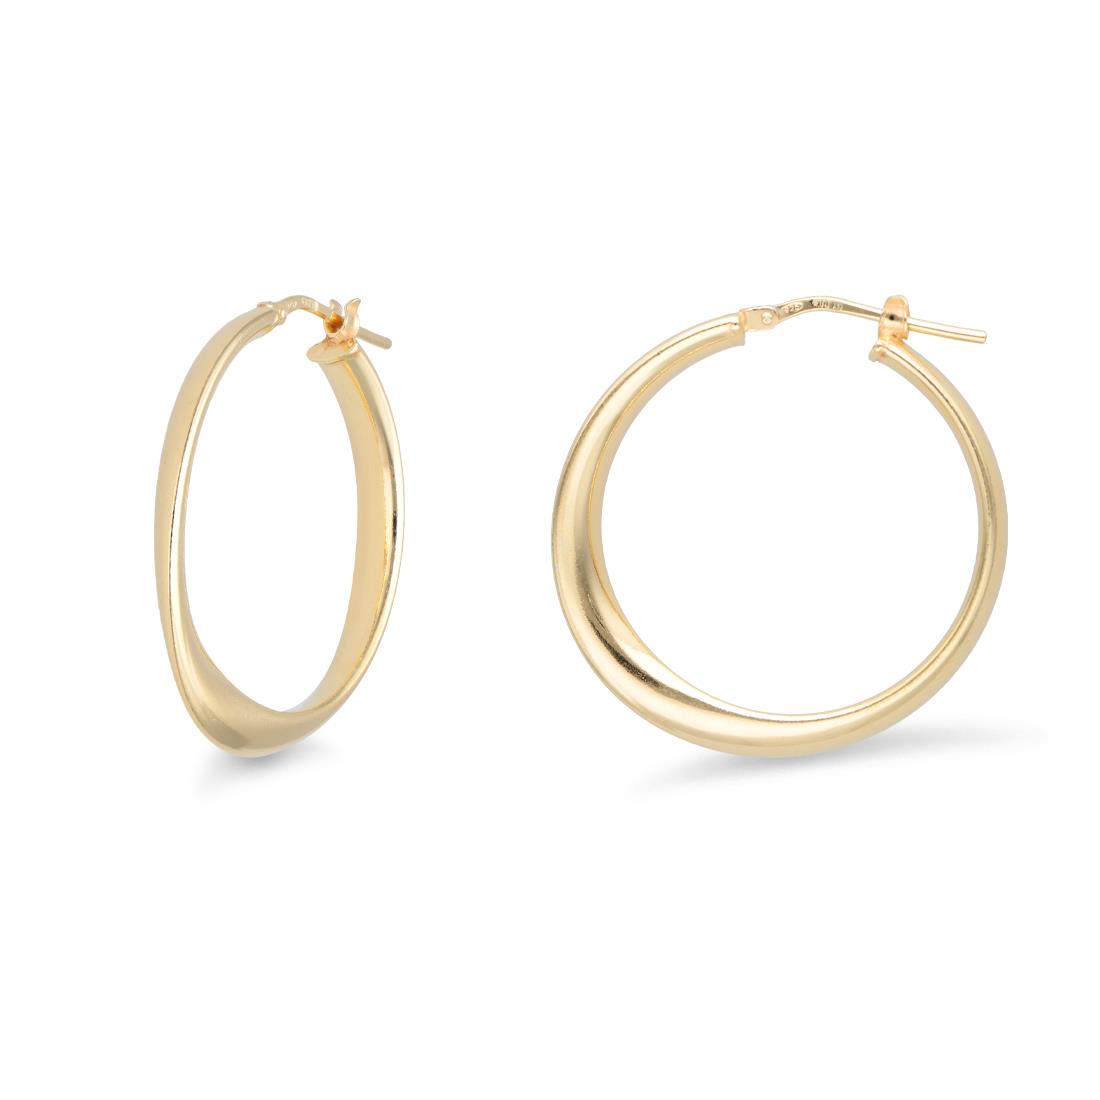 Hula Hoop collection rounded hoop earrings in 925 yellow silver - LUXURY MILANO